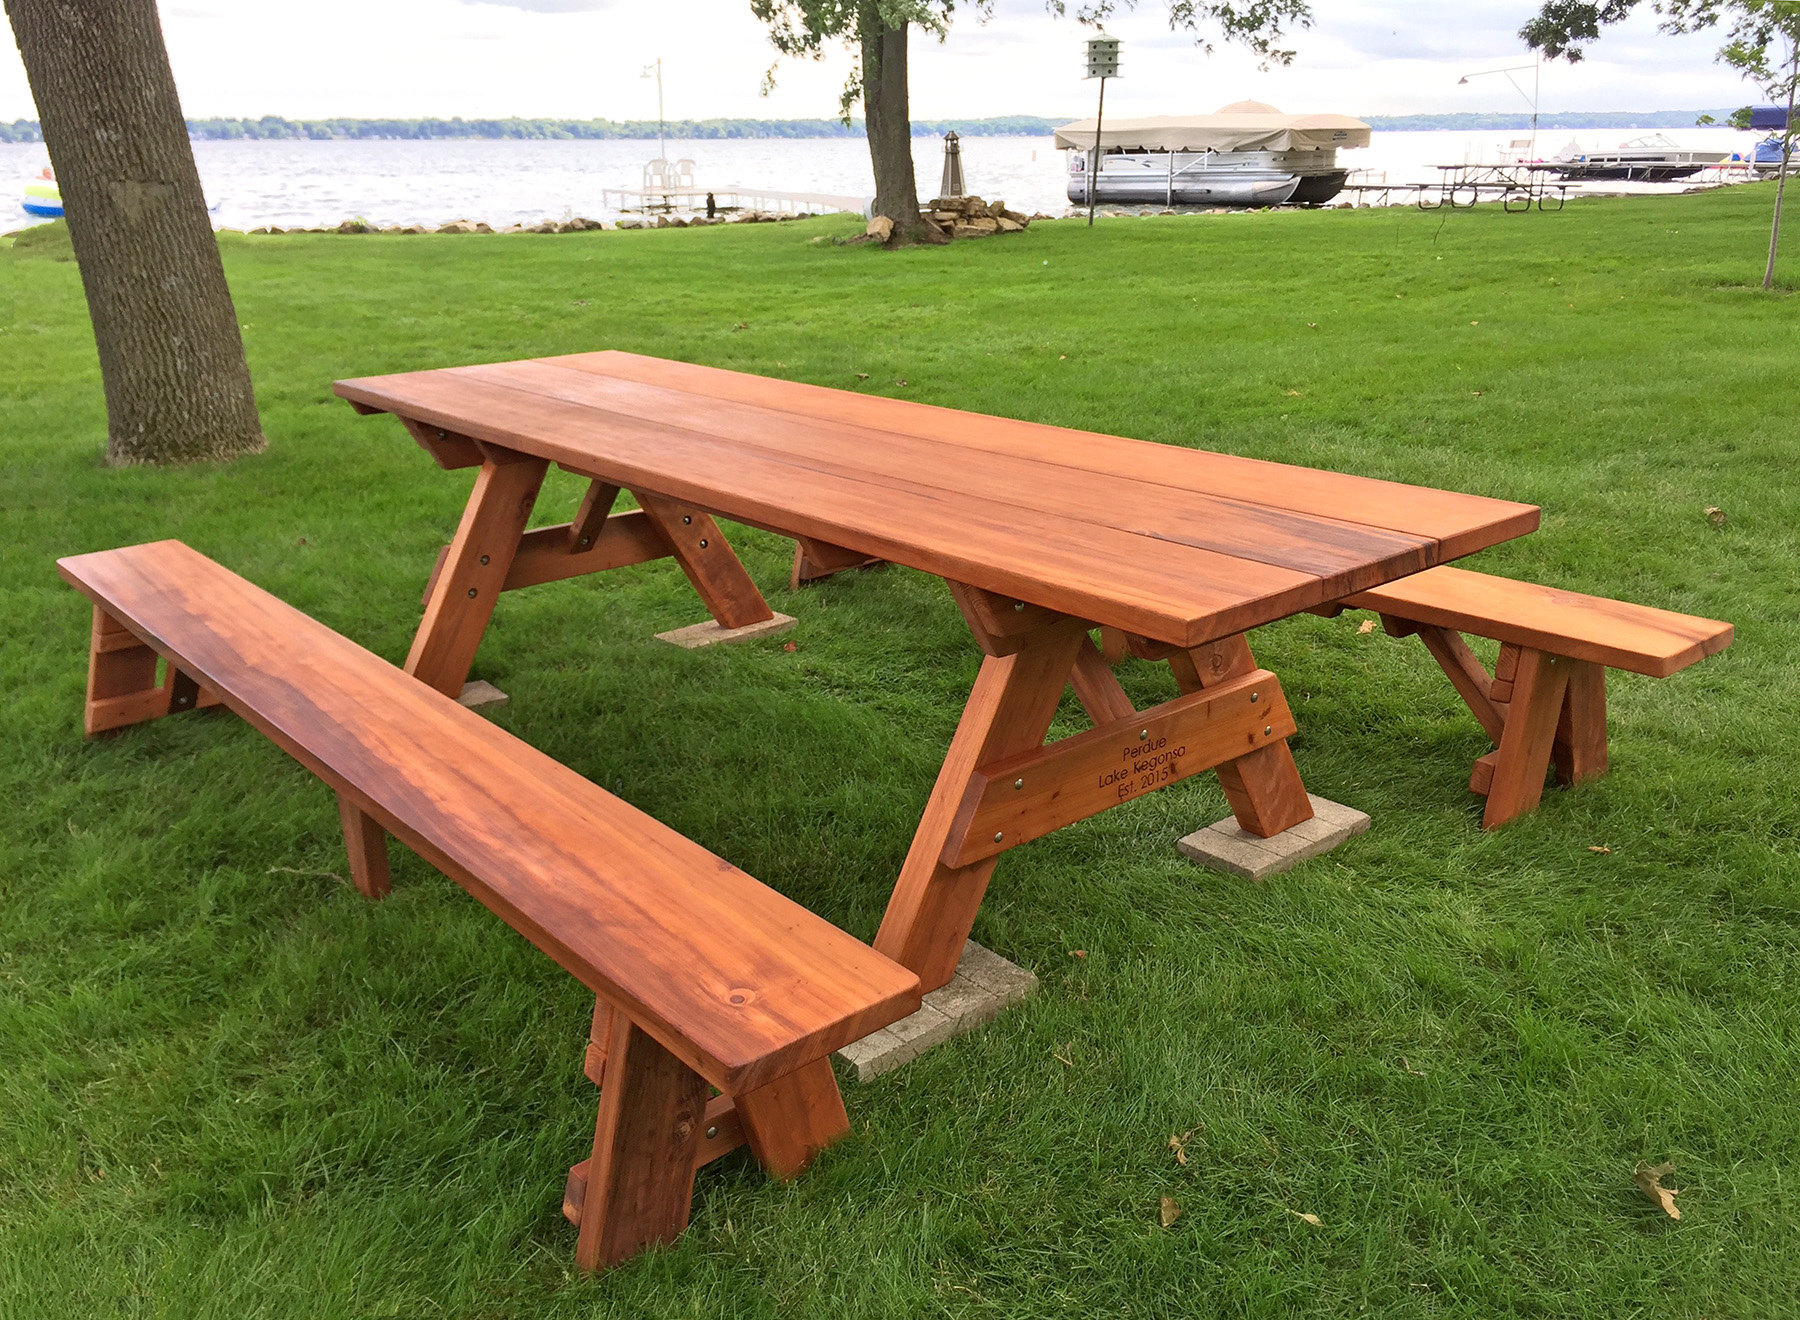 Chunky wooden dining table with benches